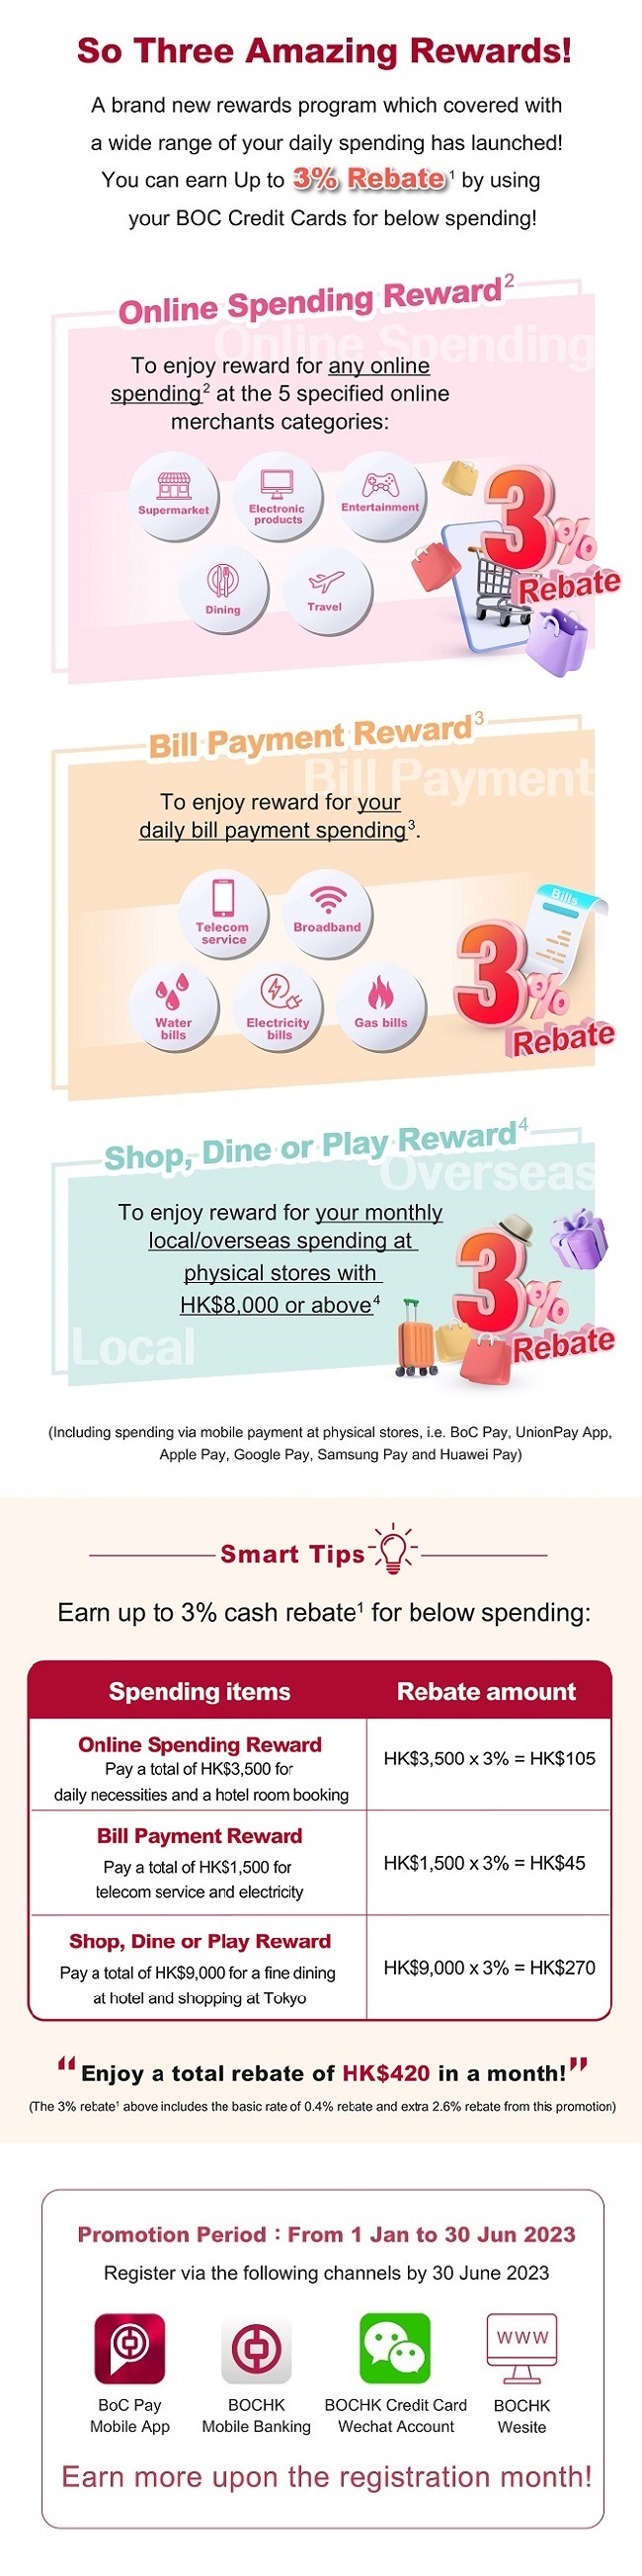 so-three-amazing-rewards-earn-up-to-3-rebate-credit-card-bank-of